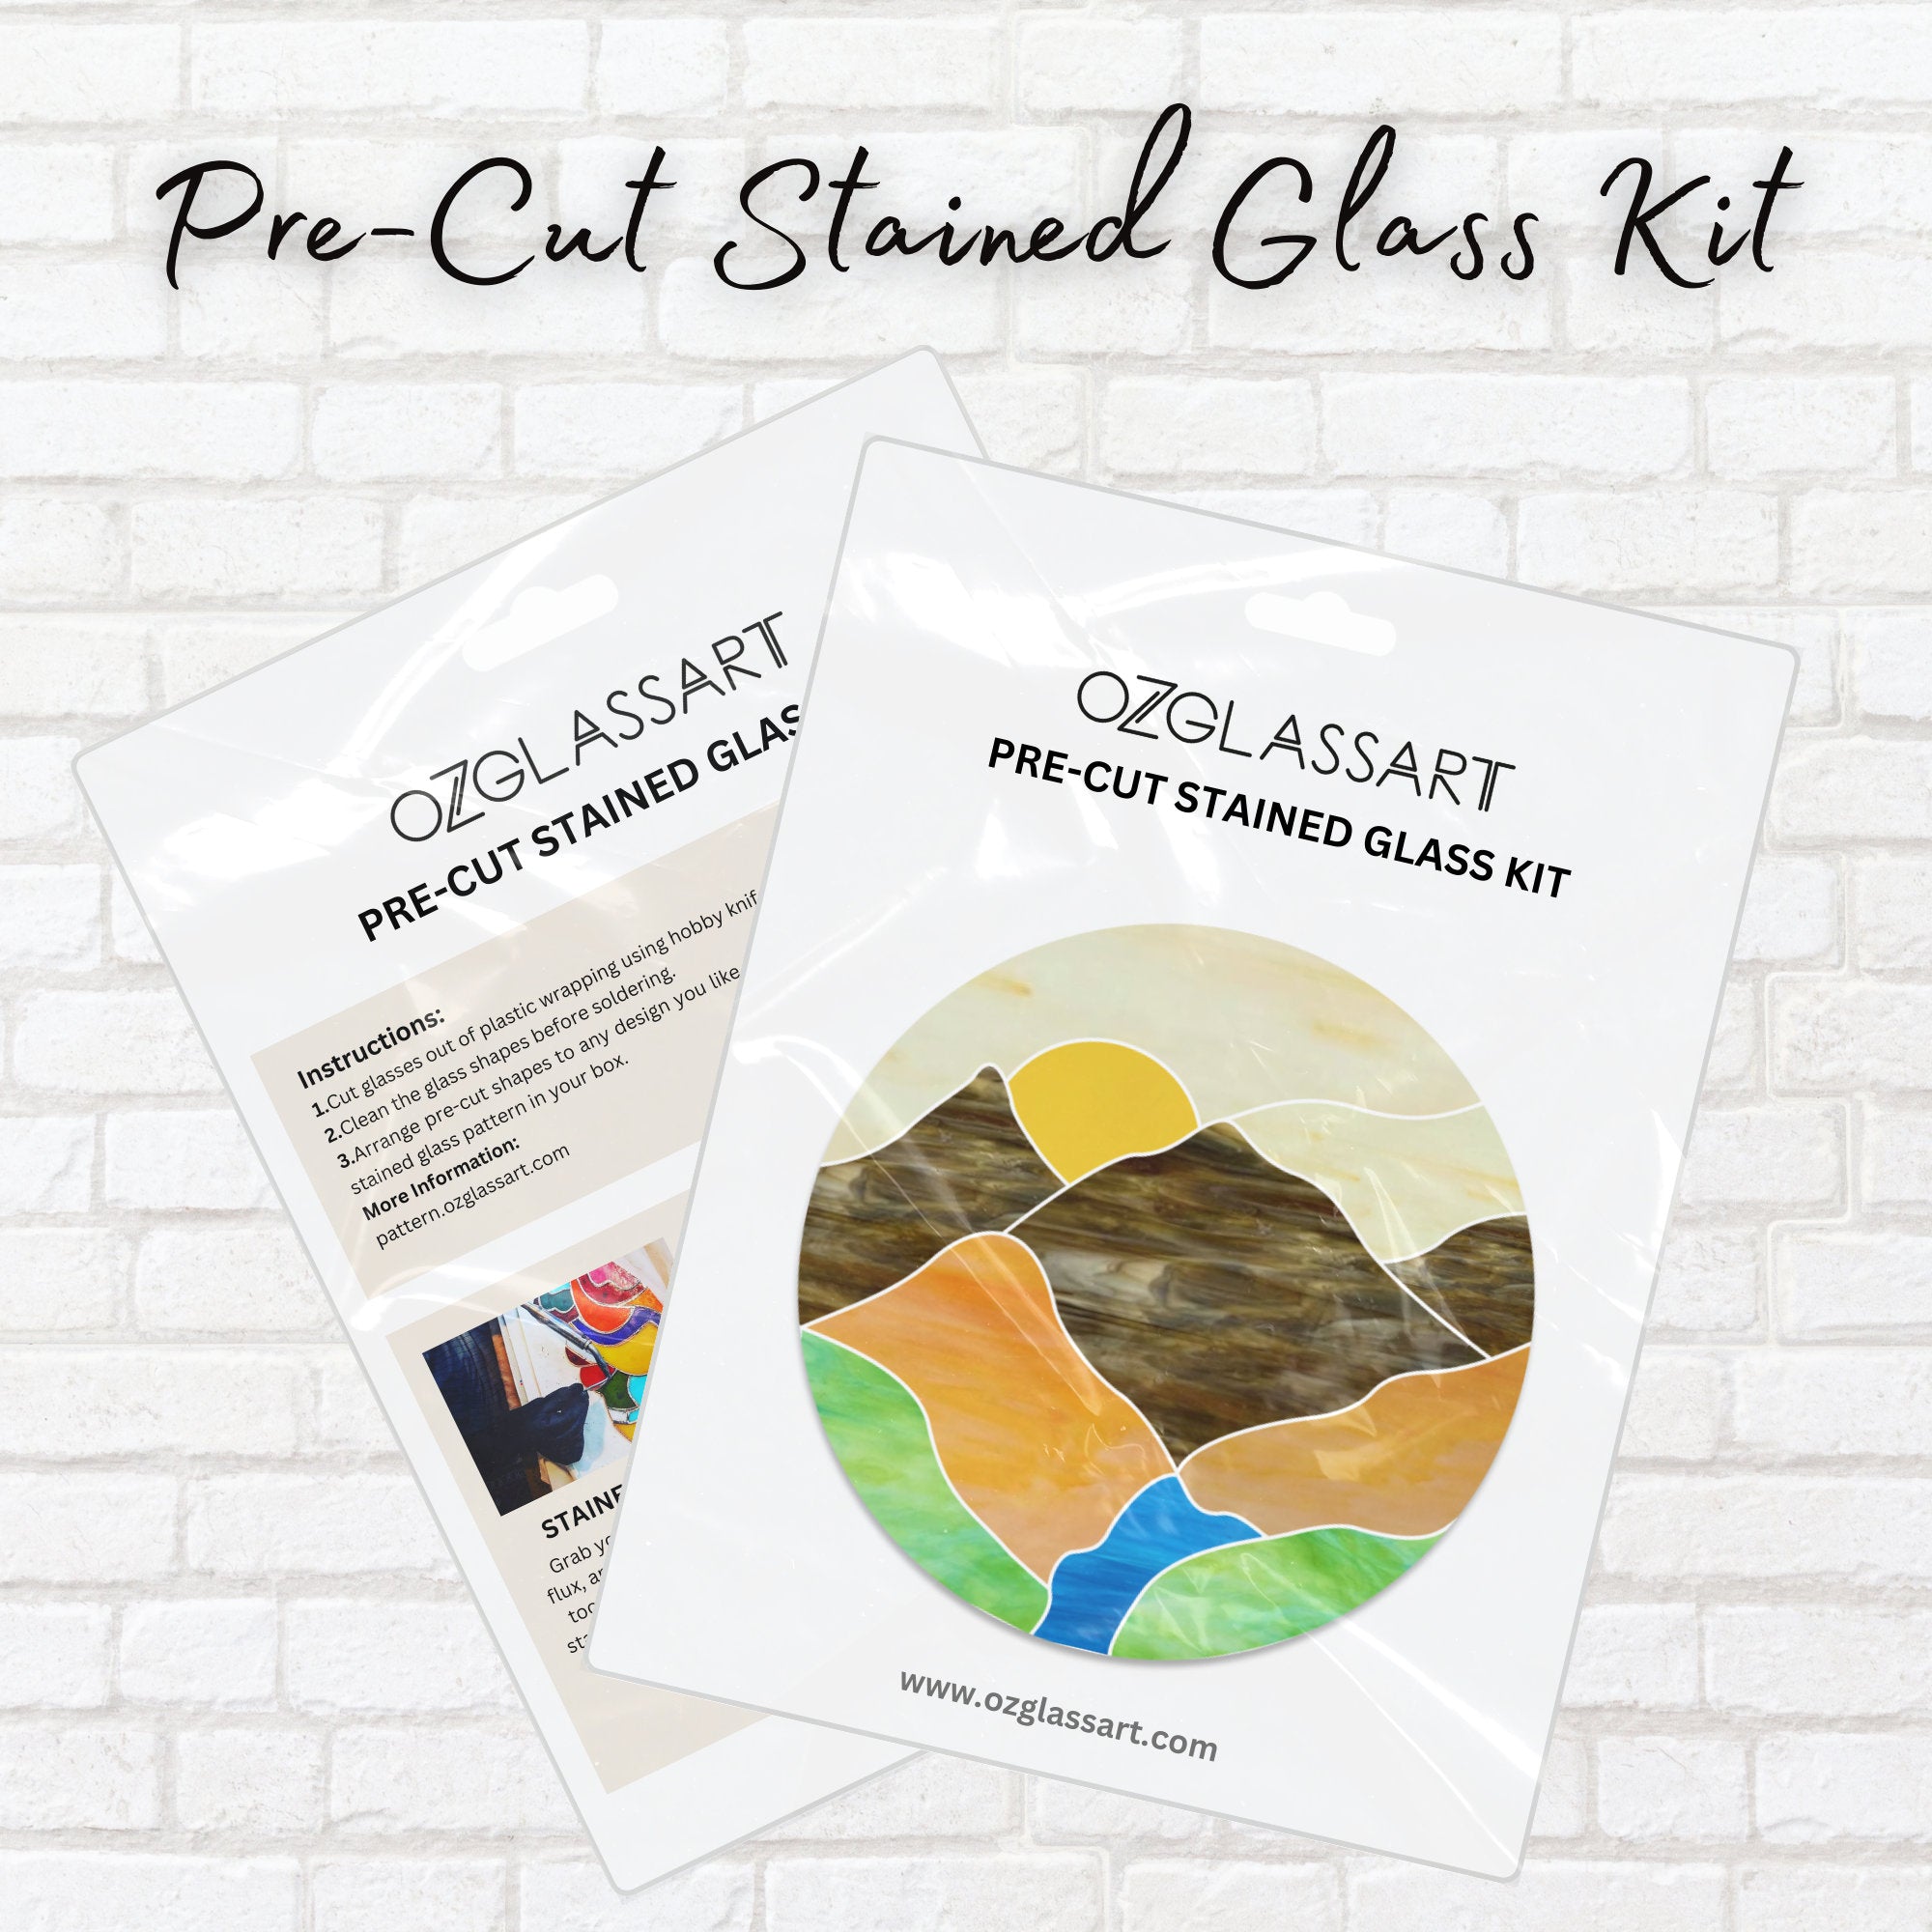 Precut Stained Glass Mountain Kit - Stained Glass, Mosaic Glass